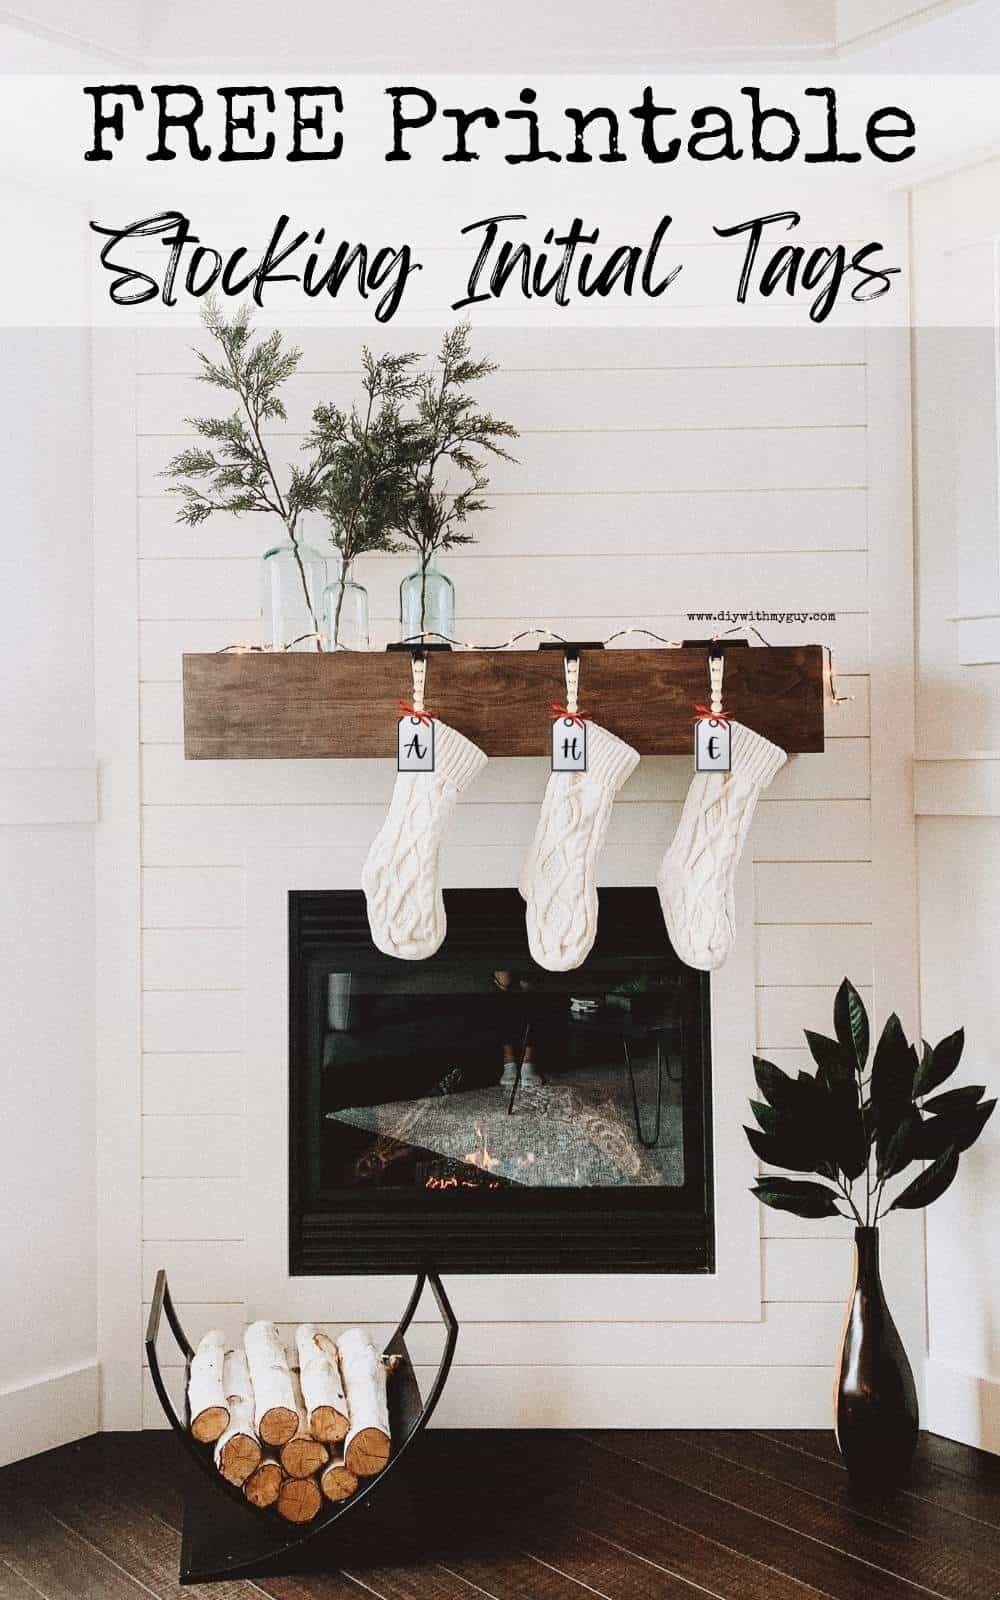 DIY Stocking Letter Tags FREE Printable DIY With My Guy